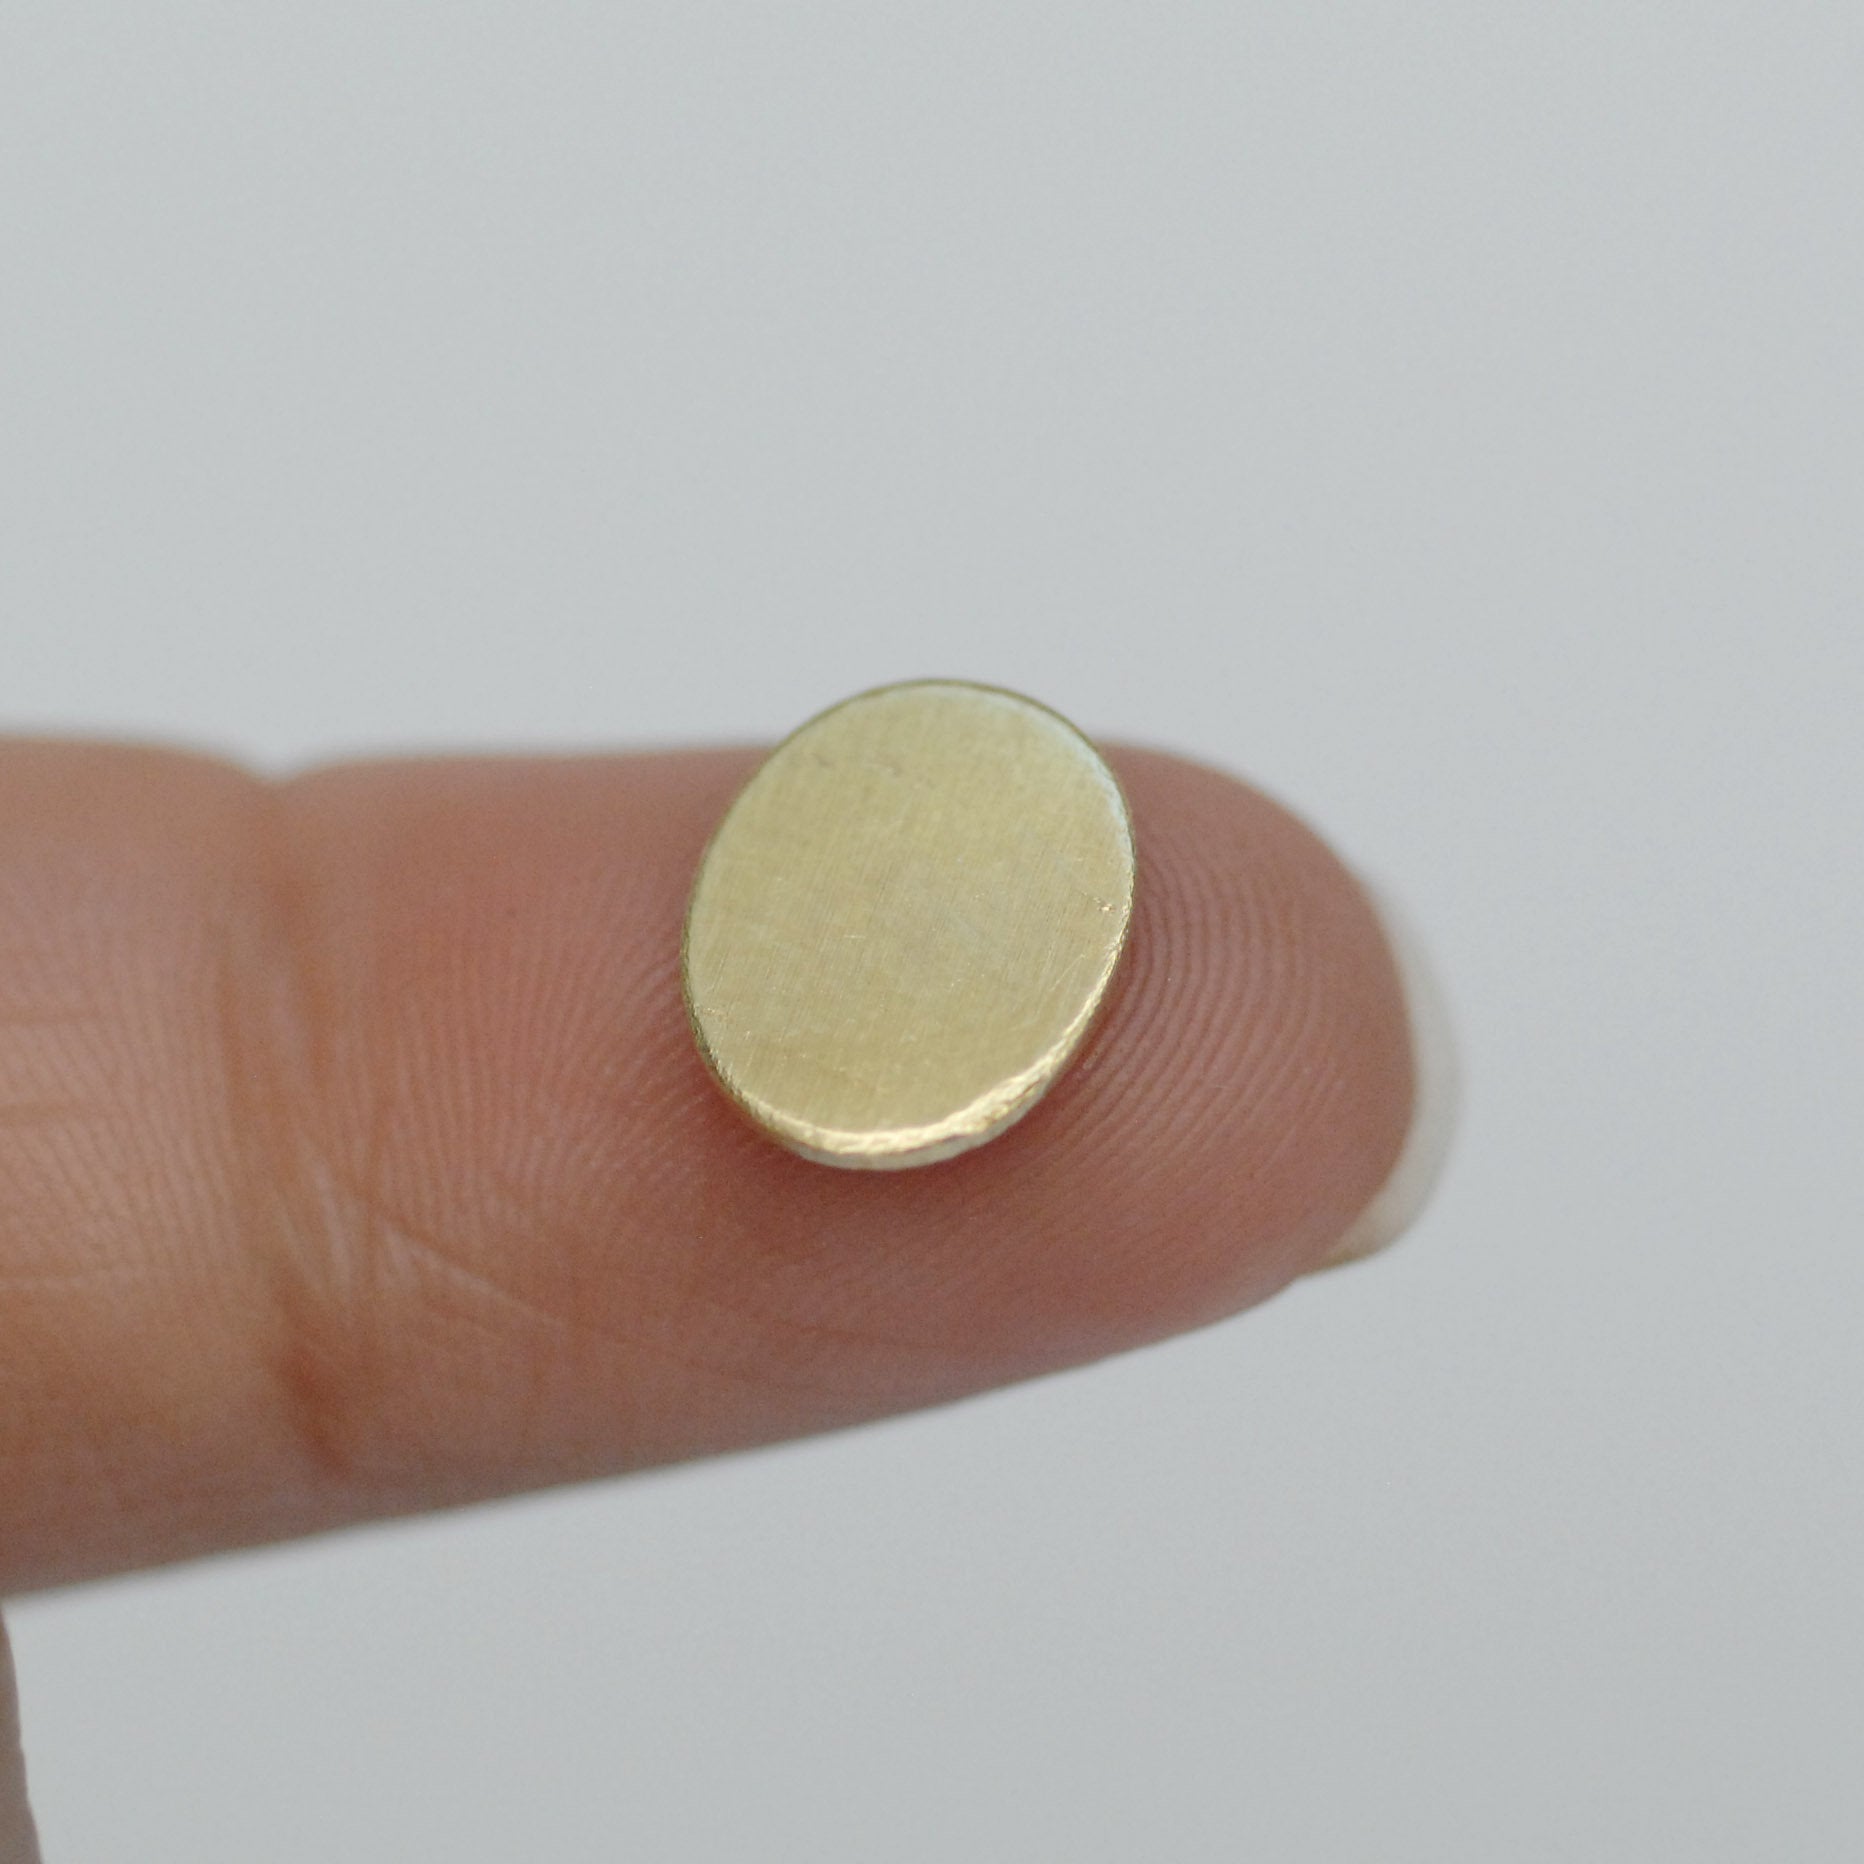 Small ovals for making jewelry 10.5mm x 8.5mm 24g 22g 20g copper, brass, bronze, nickel silver